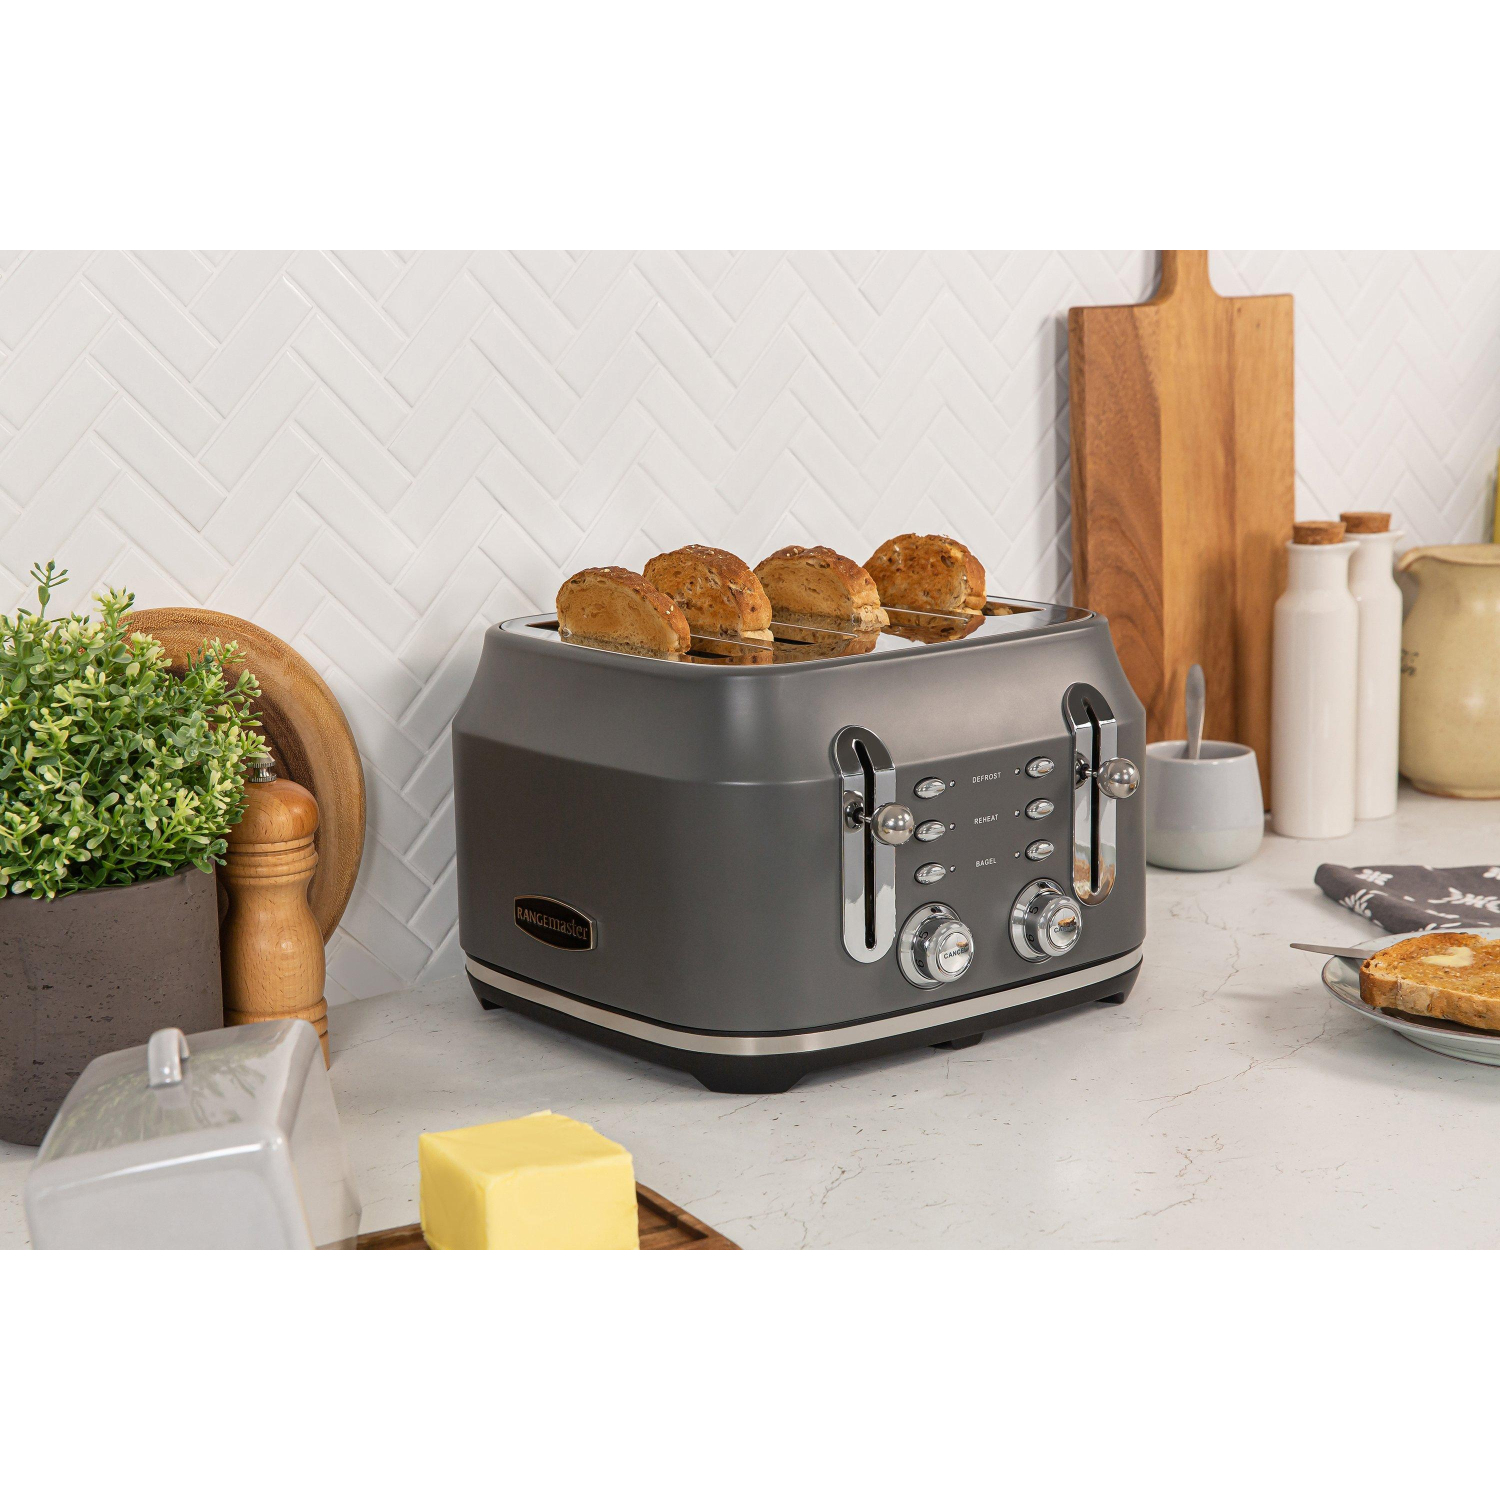 Rangemaster RMCL4S201GY 4 Slice Toaster - Matte Slate Grey - 2